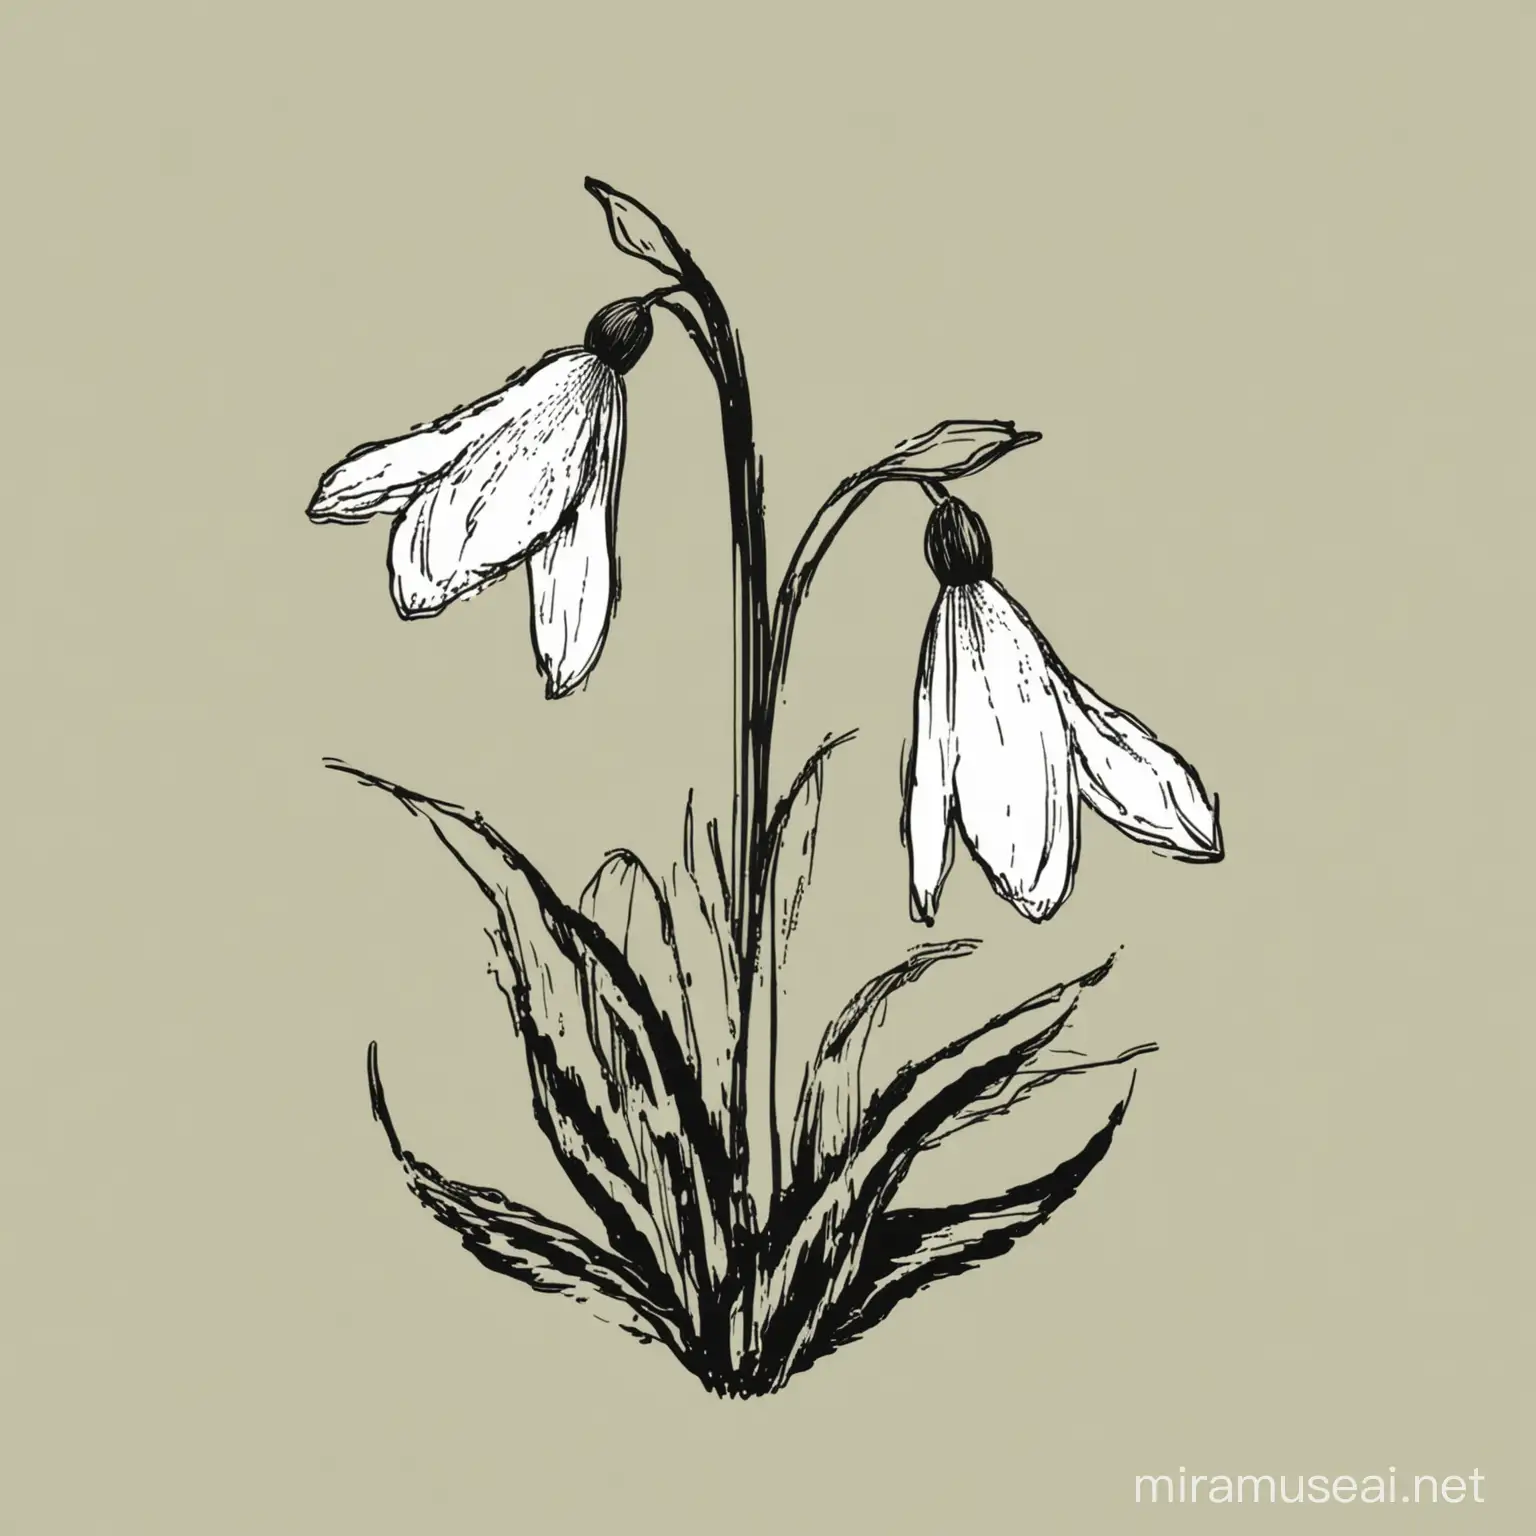 The illustration should depict a snowdrop created using a single continuous line. The line should originate from the bottom, forming a slender stem that gently curves. Continuing upward, it should outline the leaves and the snowdrop bud, with each petal distinctly represented. As the line reaches the top, it should define the delicate shape of the flower's bloom, capturing its elegant simplicity. Finally, the line should gracefully complete the outline of the snowdrop, returning to the base. This illustration should be a vector style. Just an black oneline art style